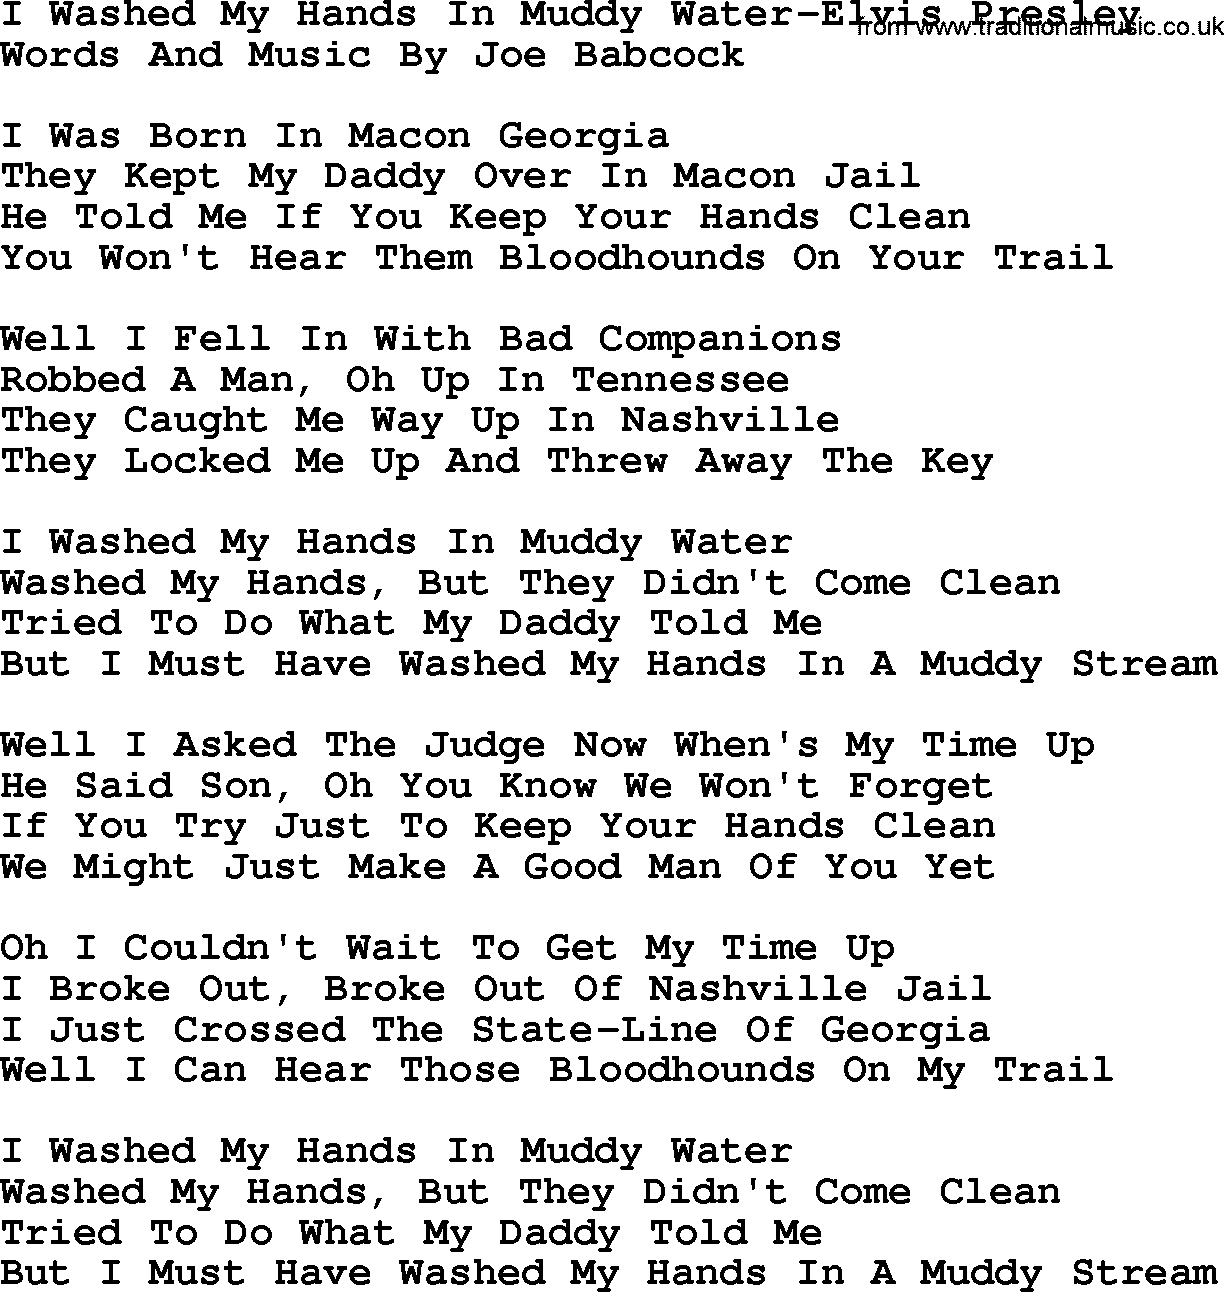 Country music song: I Washed My Hands In Muddy Water-Elvis Presley lyrics and chords